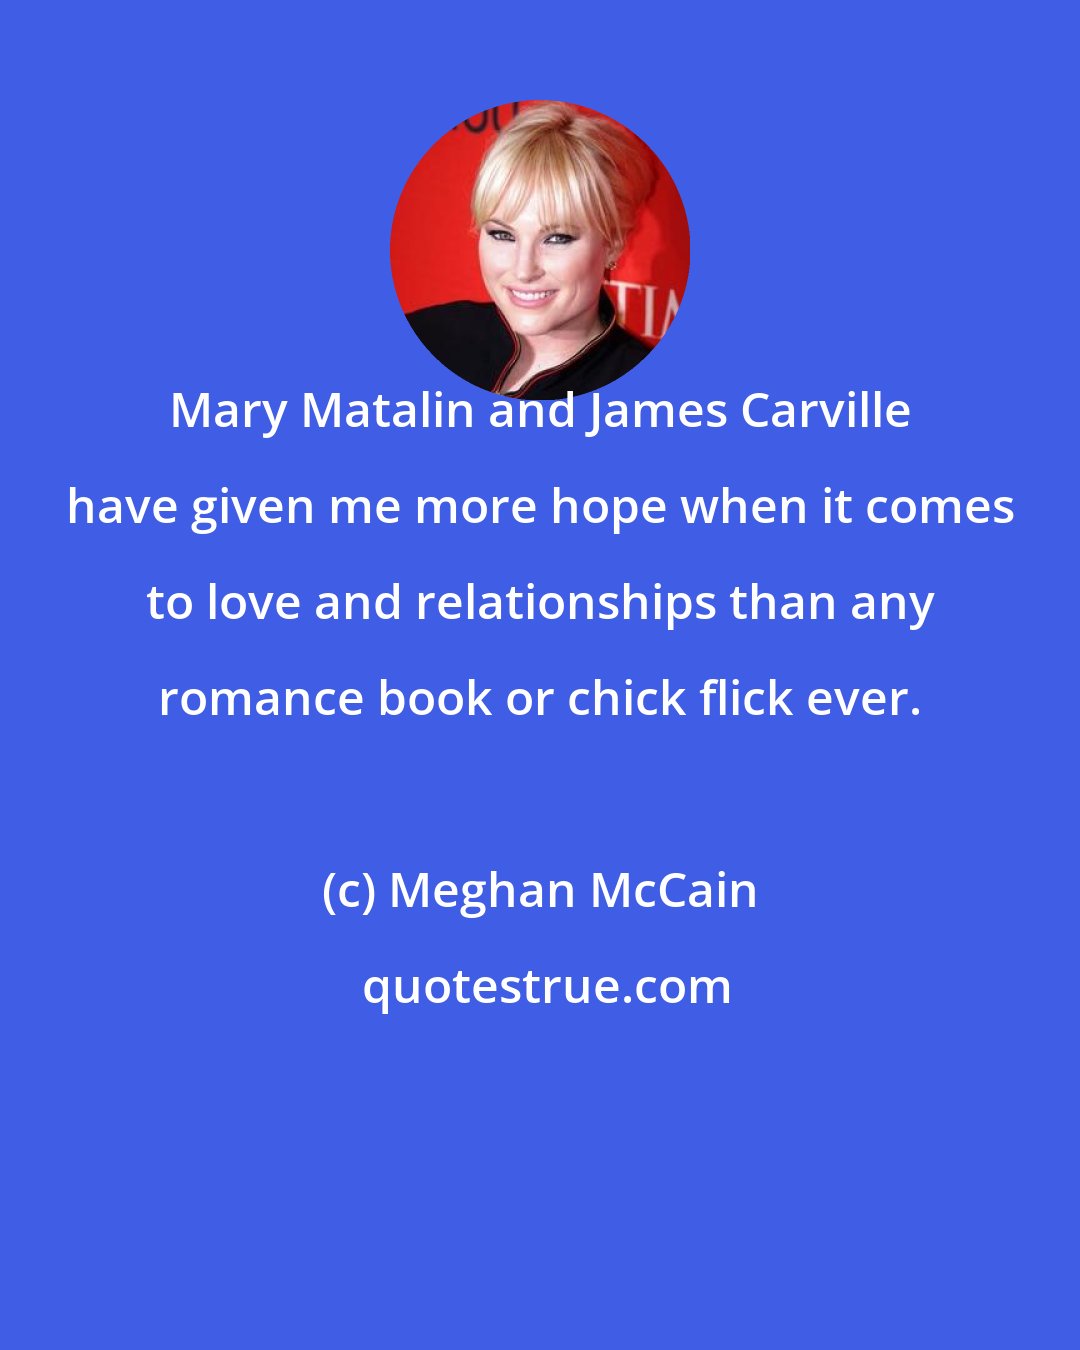 Meghan McCain: Mary Matalin and James Carville have given me more hope when it comes to love and relationships than any romance book or chick flick ever.